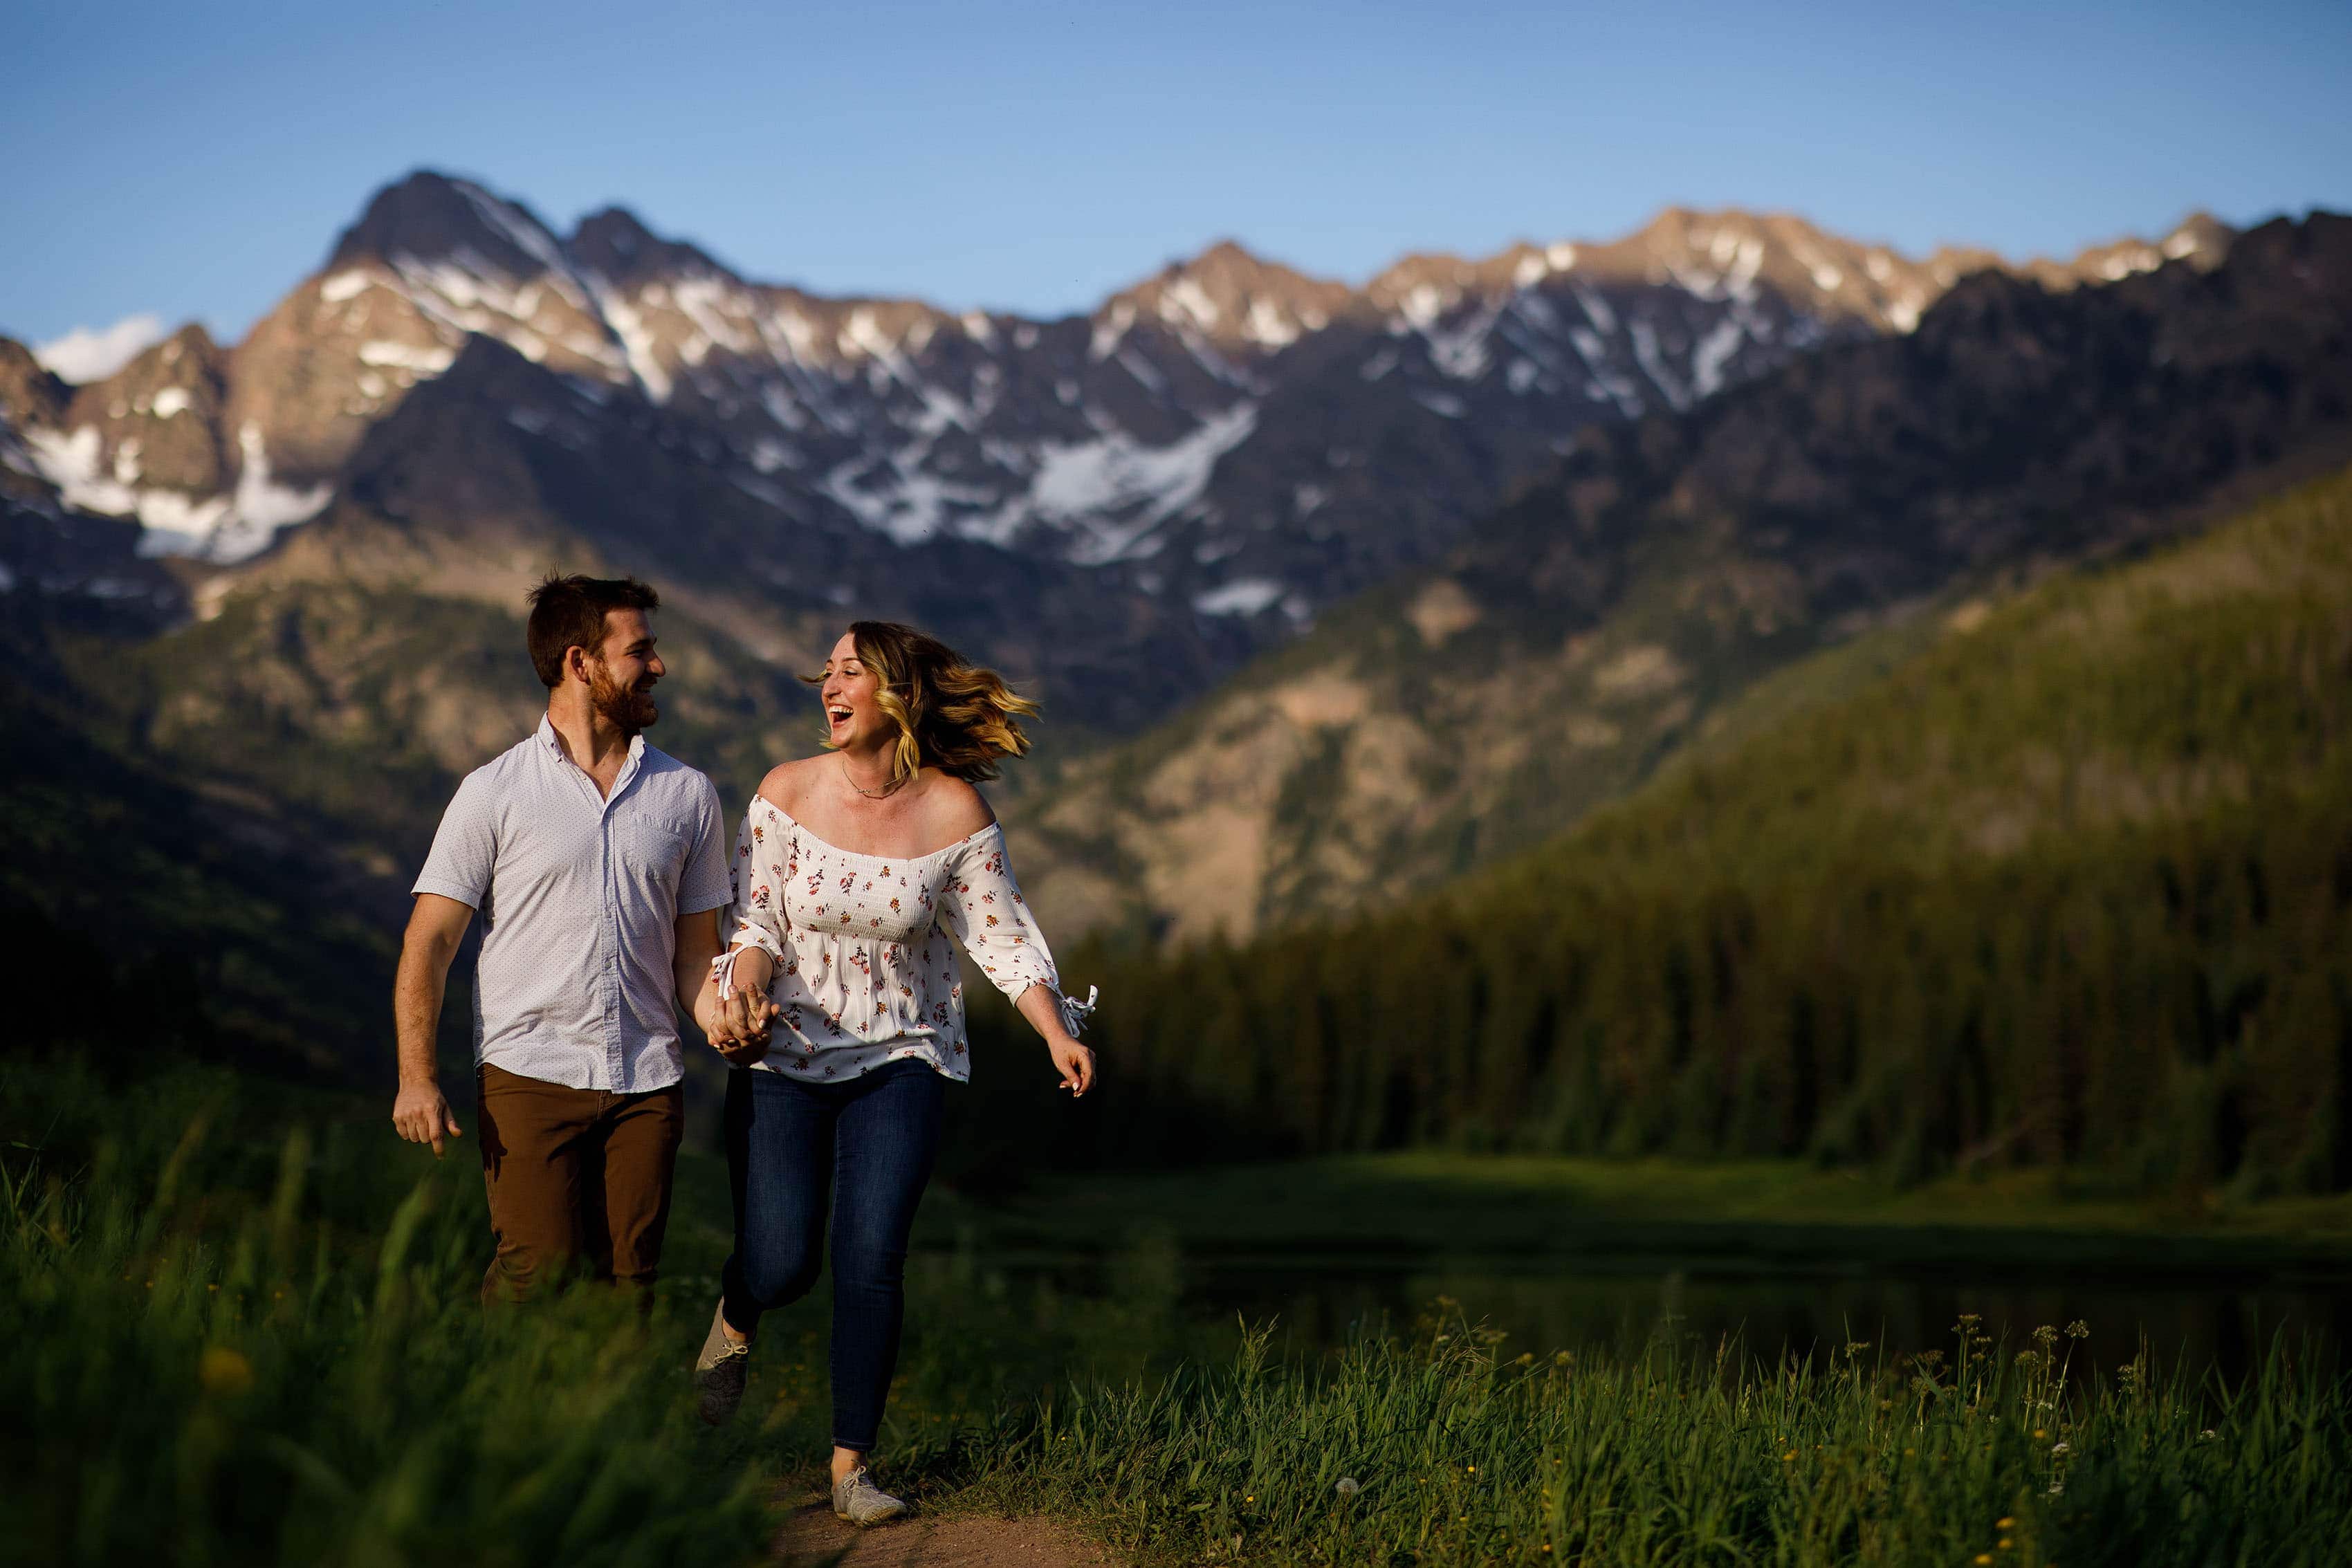 Laura and Ryan laugh and run at Piney River Ranch during their engagement session near Vail, Colorado